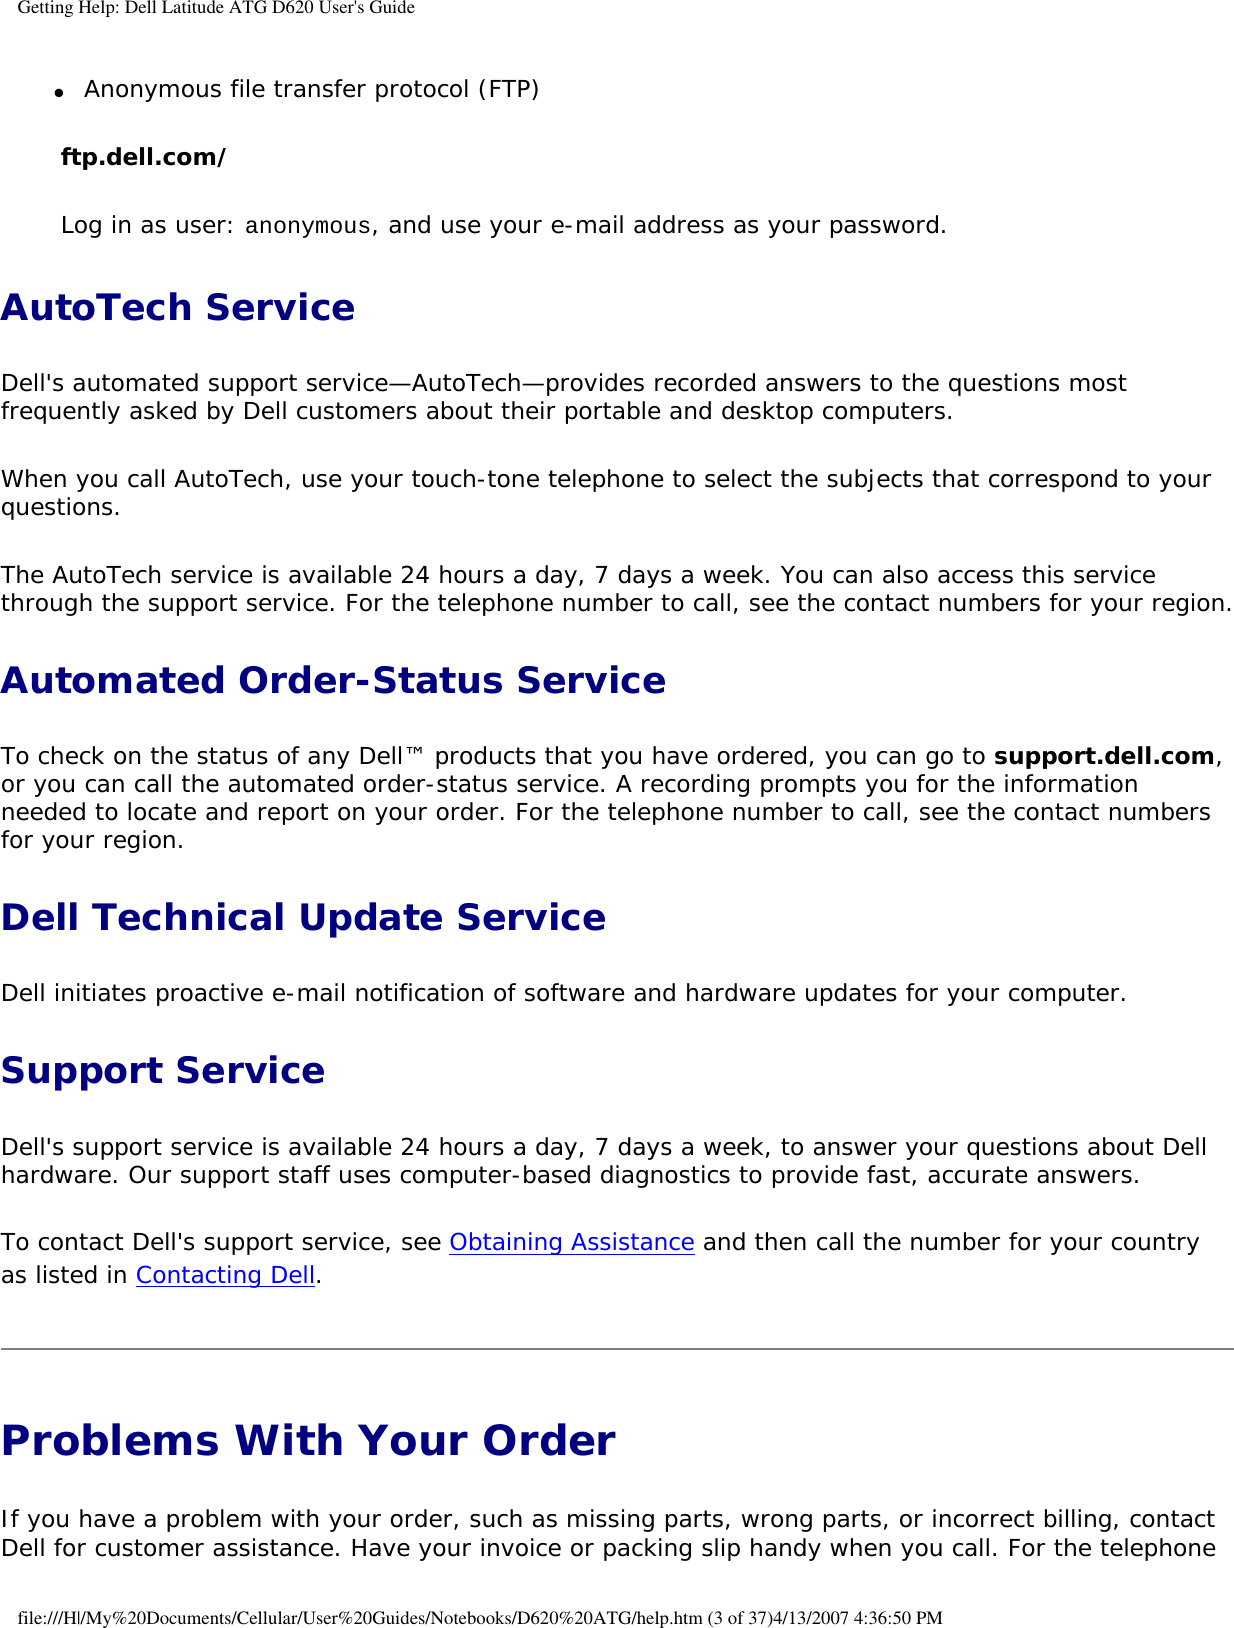 Getting Help: Dell Latitude ATG D620 User&apos;s Guide●     Anonymous file transfer protocol (FTP)  ftp.dell.com/Log in as user: anonymous, and use your e-mail address as your password.AutoTech ServiceDell&apos;s automated support service—AutoTech—provides recorded answers to the questions most frequently asked by Dell customers about their portable and desktop computers.When you call AutoTech, use your touch-tone telephone to select the subjects that correspond to your questions.The AutoTech service is available 24 hours a day, 7 days a week. You can also access this service through the support service. For the telephone number to call, see the contact numbers for your region.Automated Order-Status ServiceTo check on the status of any Dell™ products that you have ordered, you can go to support.dell.com, or you can call the automated order-status service. A recording prompts you for the information needed to locate and report on your order. For the telephone number to call, see the contact numbers for your region.Dell Technical Update Service Dell initiates proactive e-mail notification of software and hardware updates for your computer.Support ServiceDell&apos;s support service is available 24 hours a day, 7 days a week, to answer your questions about Dell hardware. Our support staff uses computer-based diagnostics to provide fast, accurate answers.To contact Dell&apos;s support service, see Obtaining Assistance and then call the number for your country as listed in Contacting Dell.Problems With Your Order If you have a problem with your order, such as missing parts, wrong parts, or incorrect billing, contact Dell for customer assistance. Have your invoice or packing slip handy when you call. For the telephone file:///H|/My%20Documents/Cellular/User%20Guides/Notebooks/D620%20ATG/help.htm (3 of 37)4/13/2007 4:36:50 PM